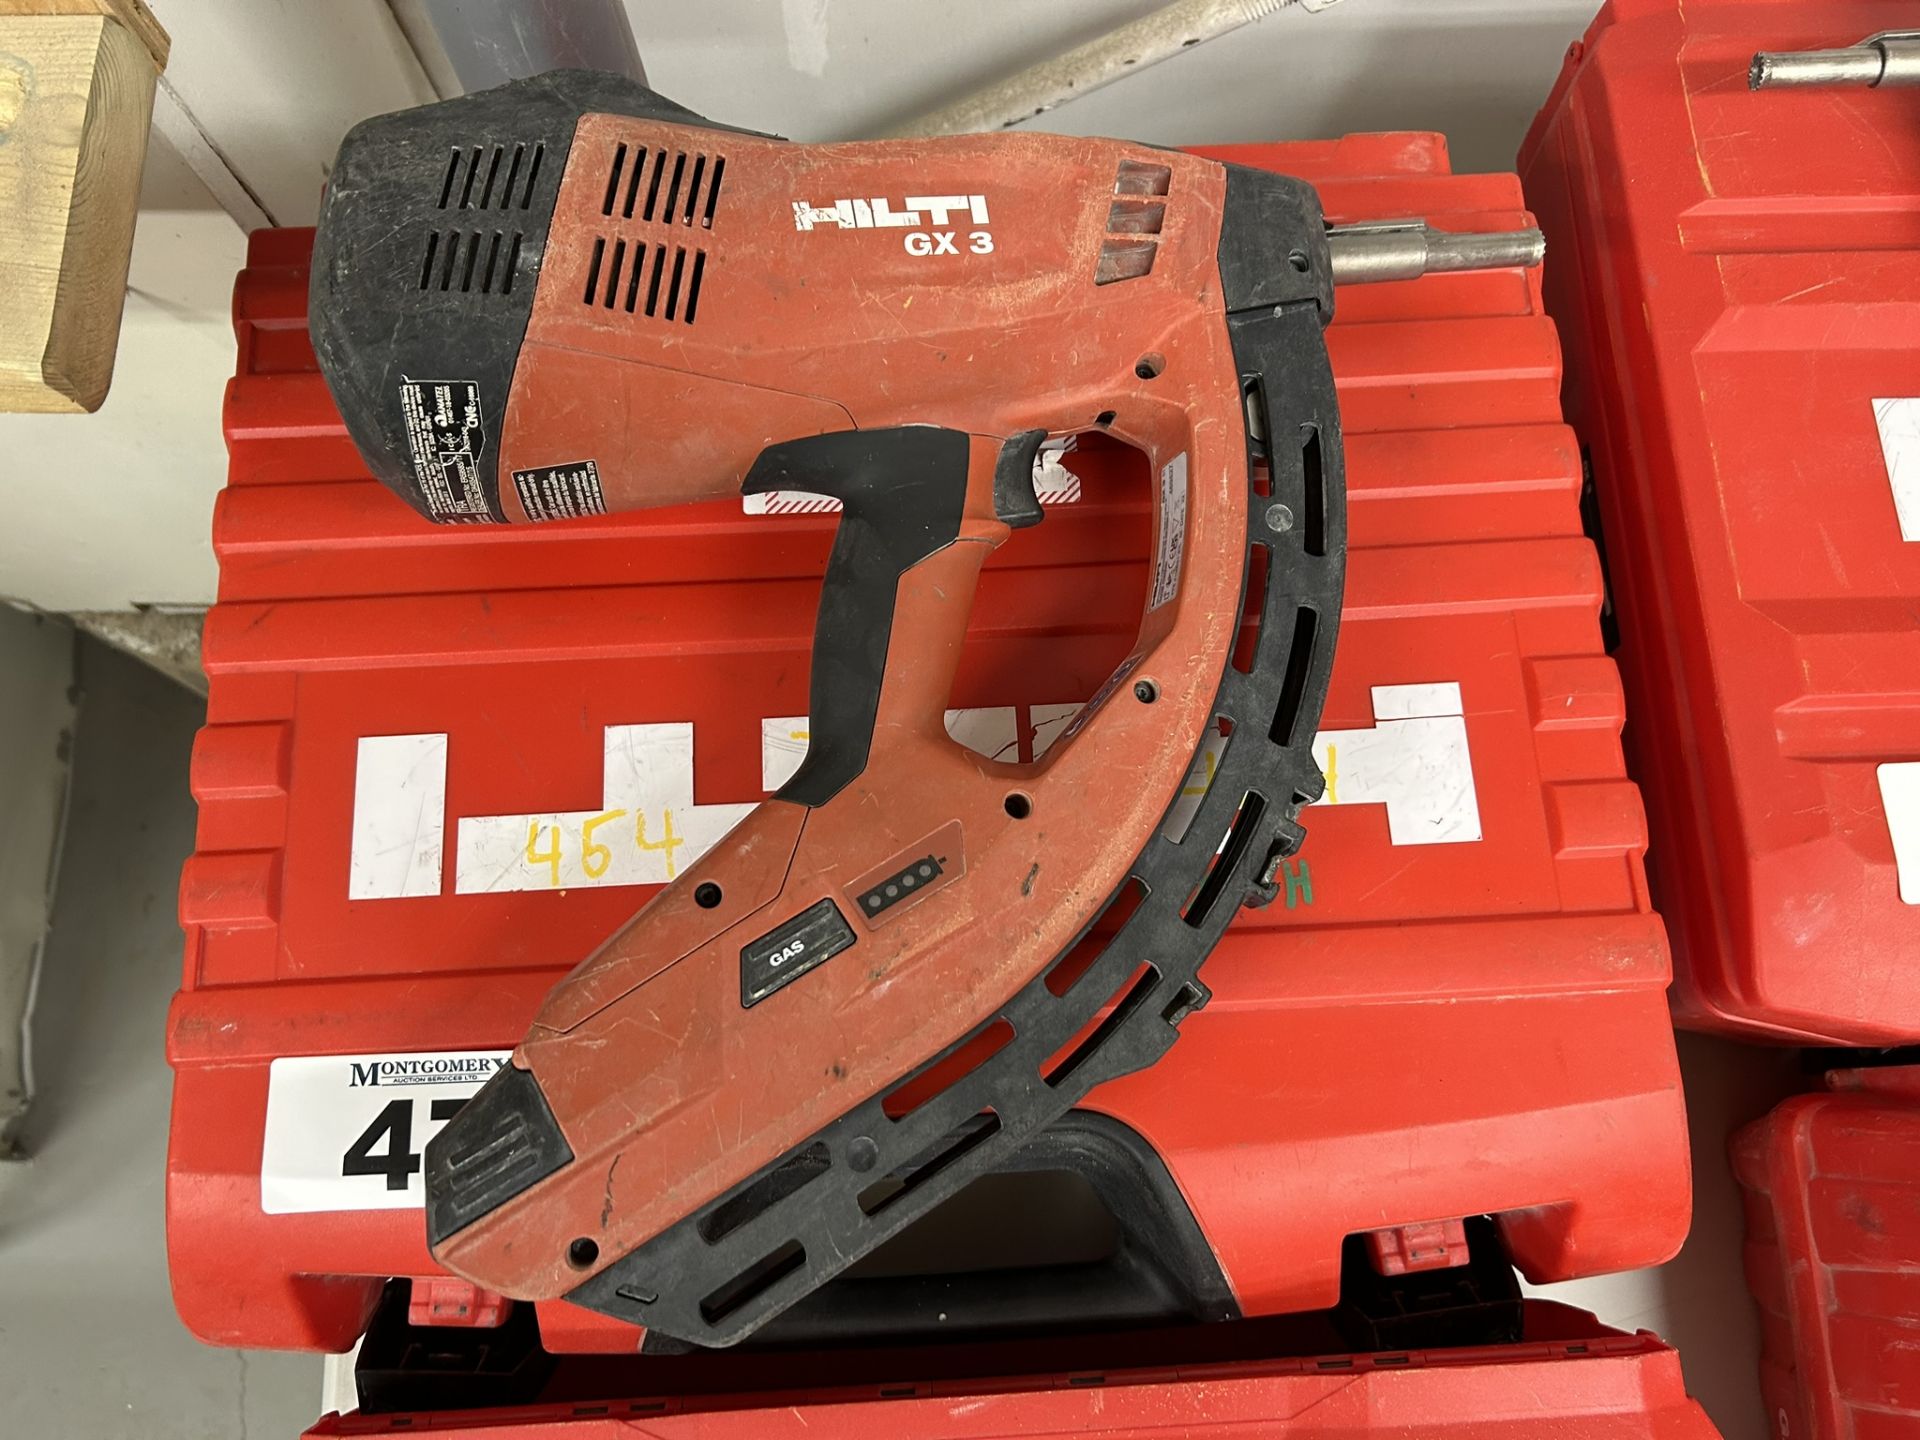 HILTI GX 3 GAS-ACTUATED FASTENING TOOL GAS NAILER WITH SINGLE POWER SOURCE FOR DRYWALL TRACK, - Image 3 of 6